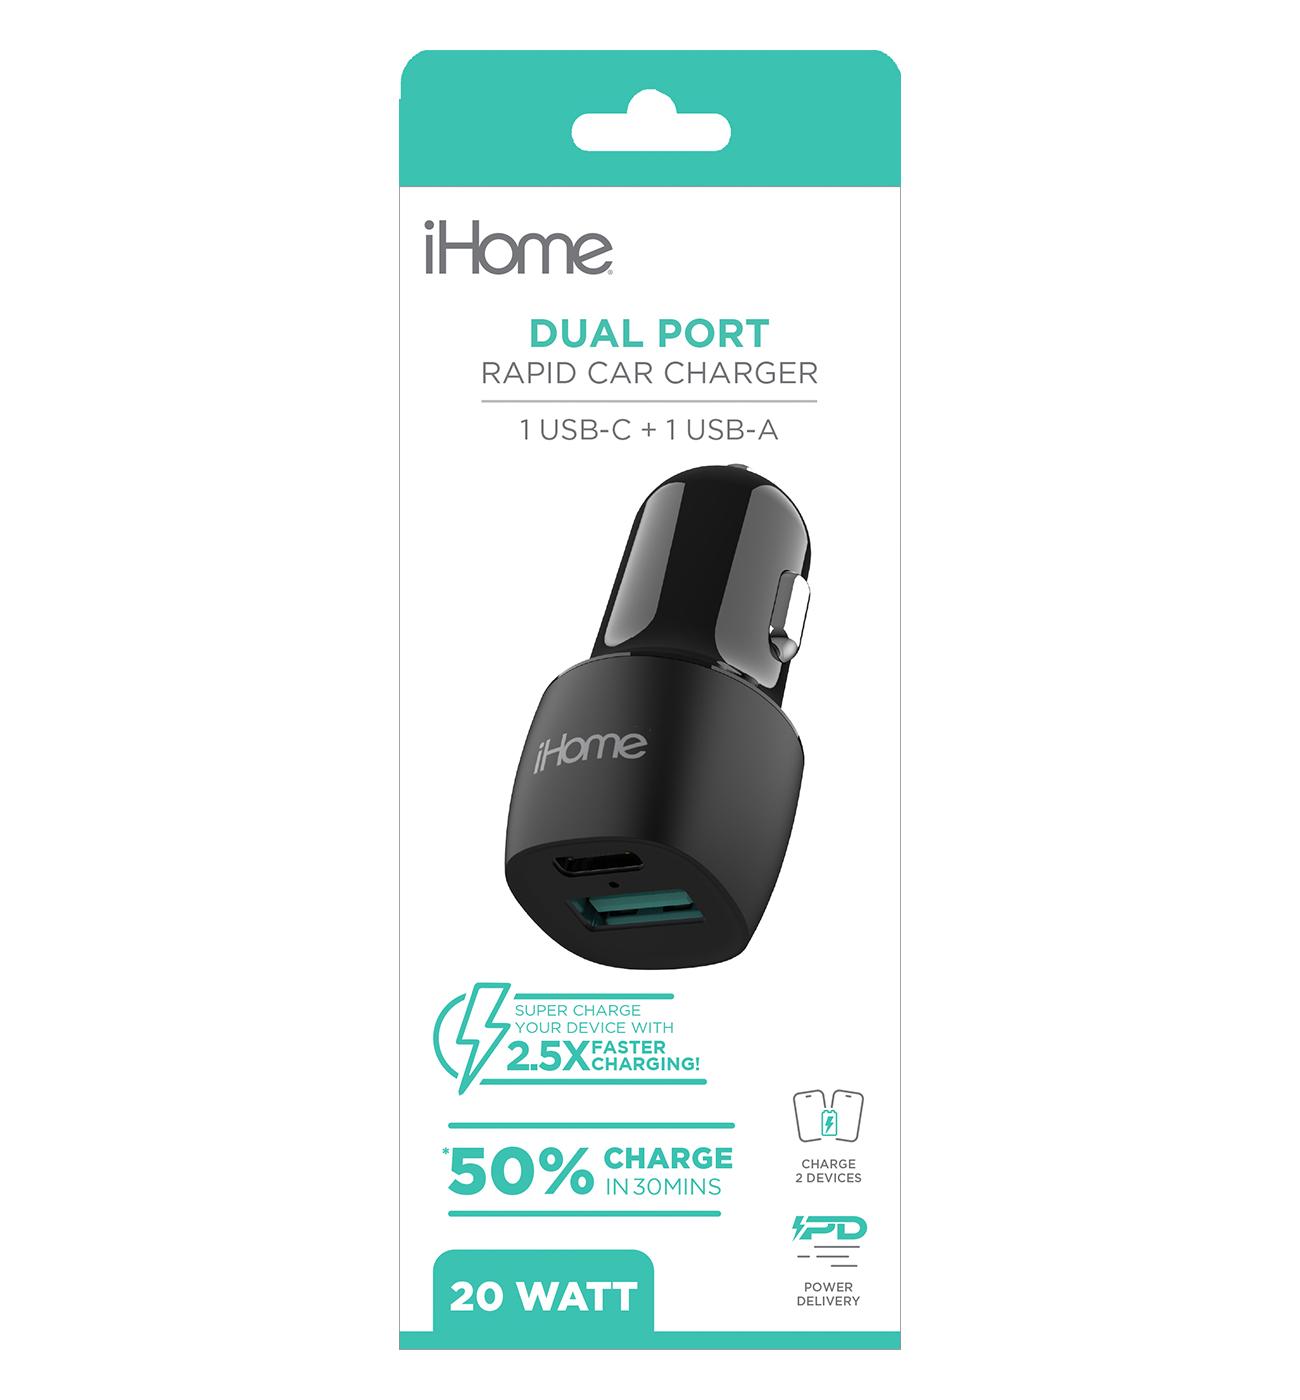 iHome Dual Port Rapid Car Charger - Black; image 1 of 2